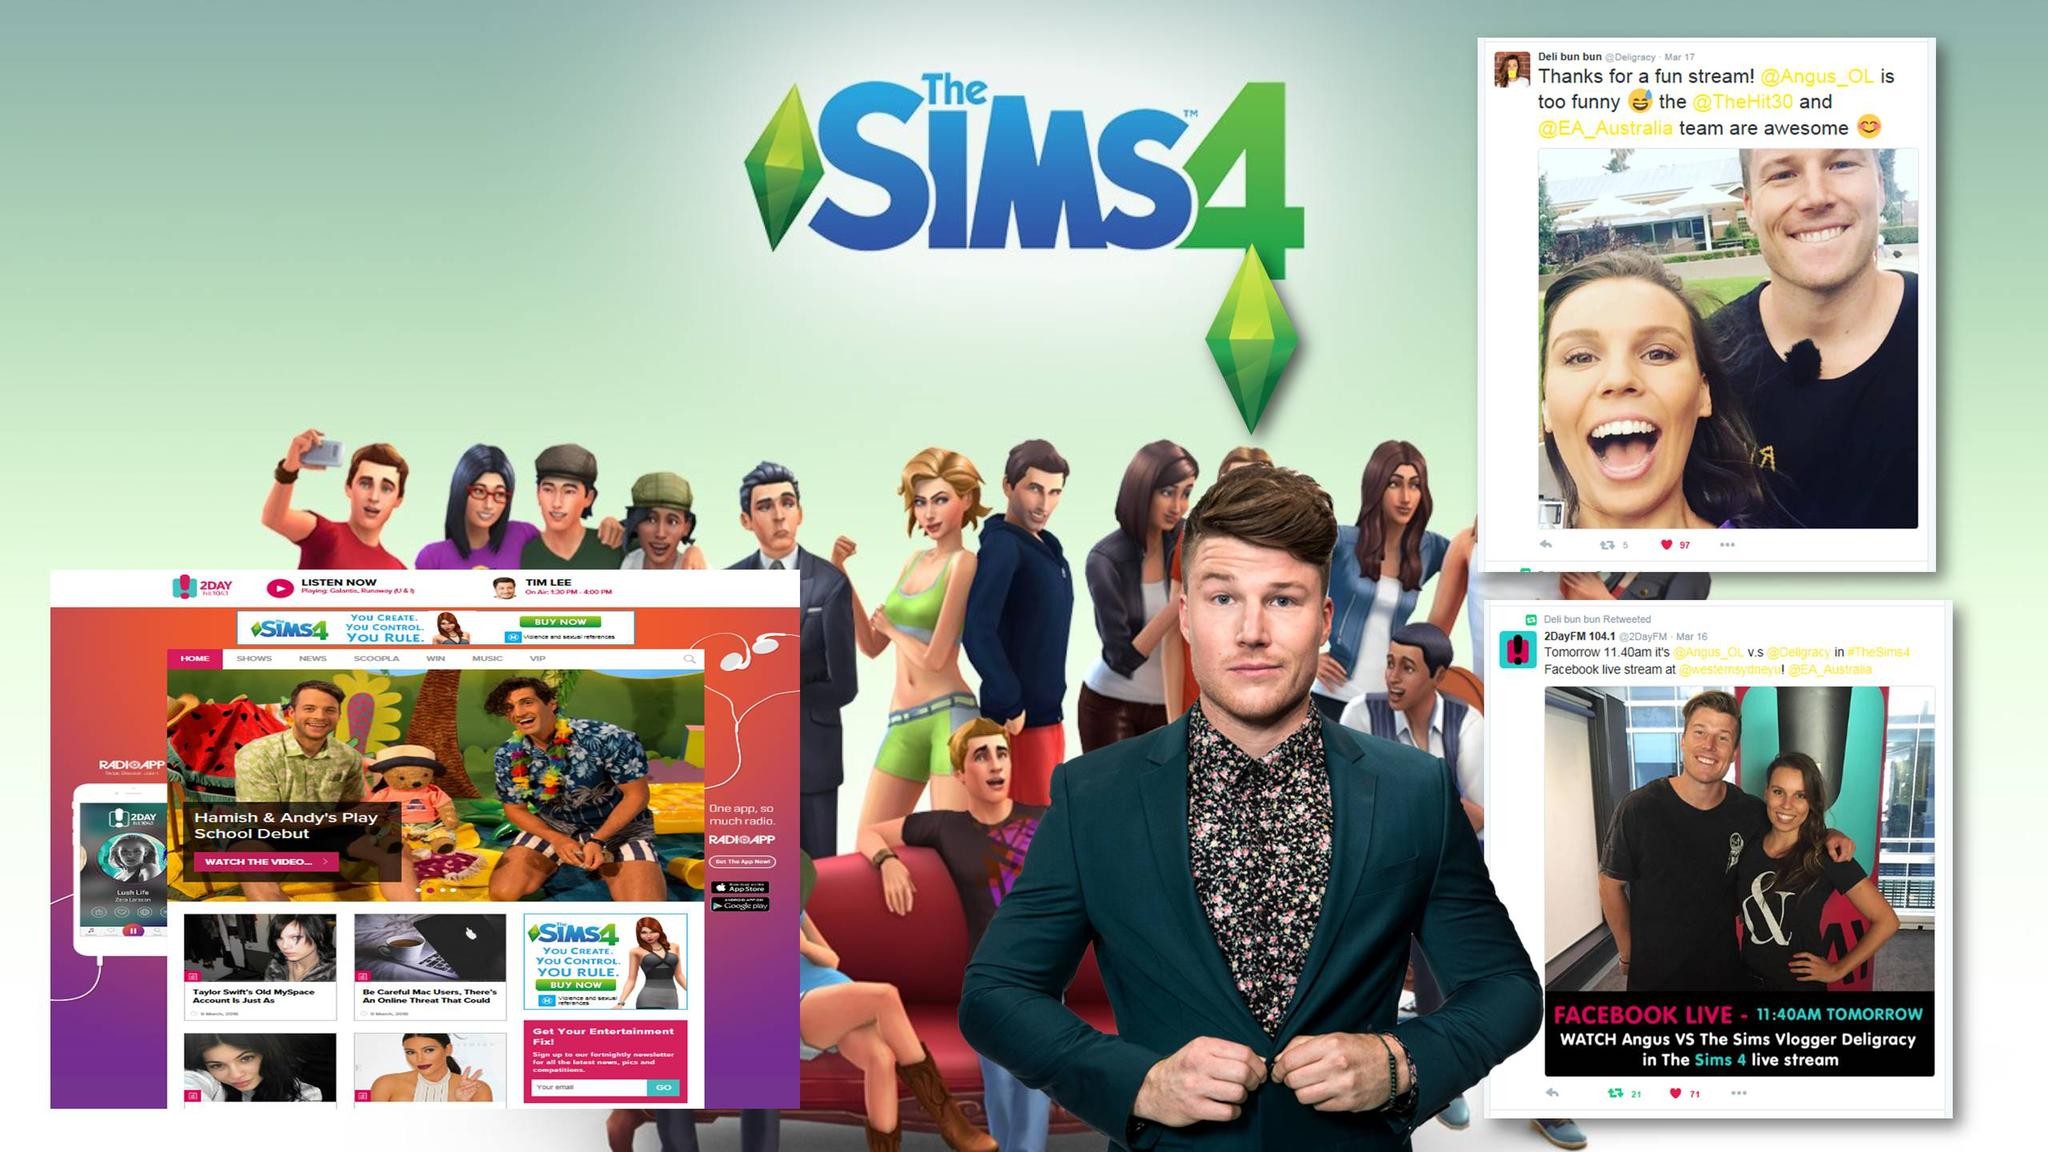 The Sims. You Create. You Control. You Rule.